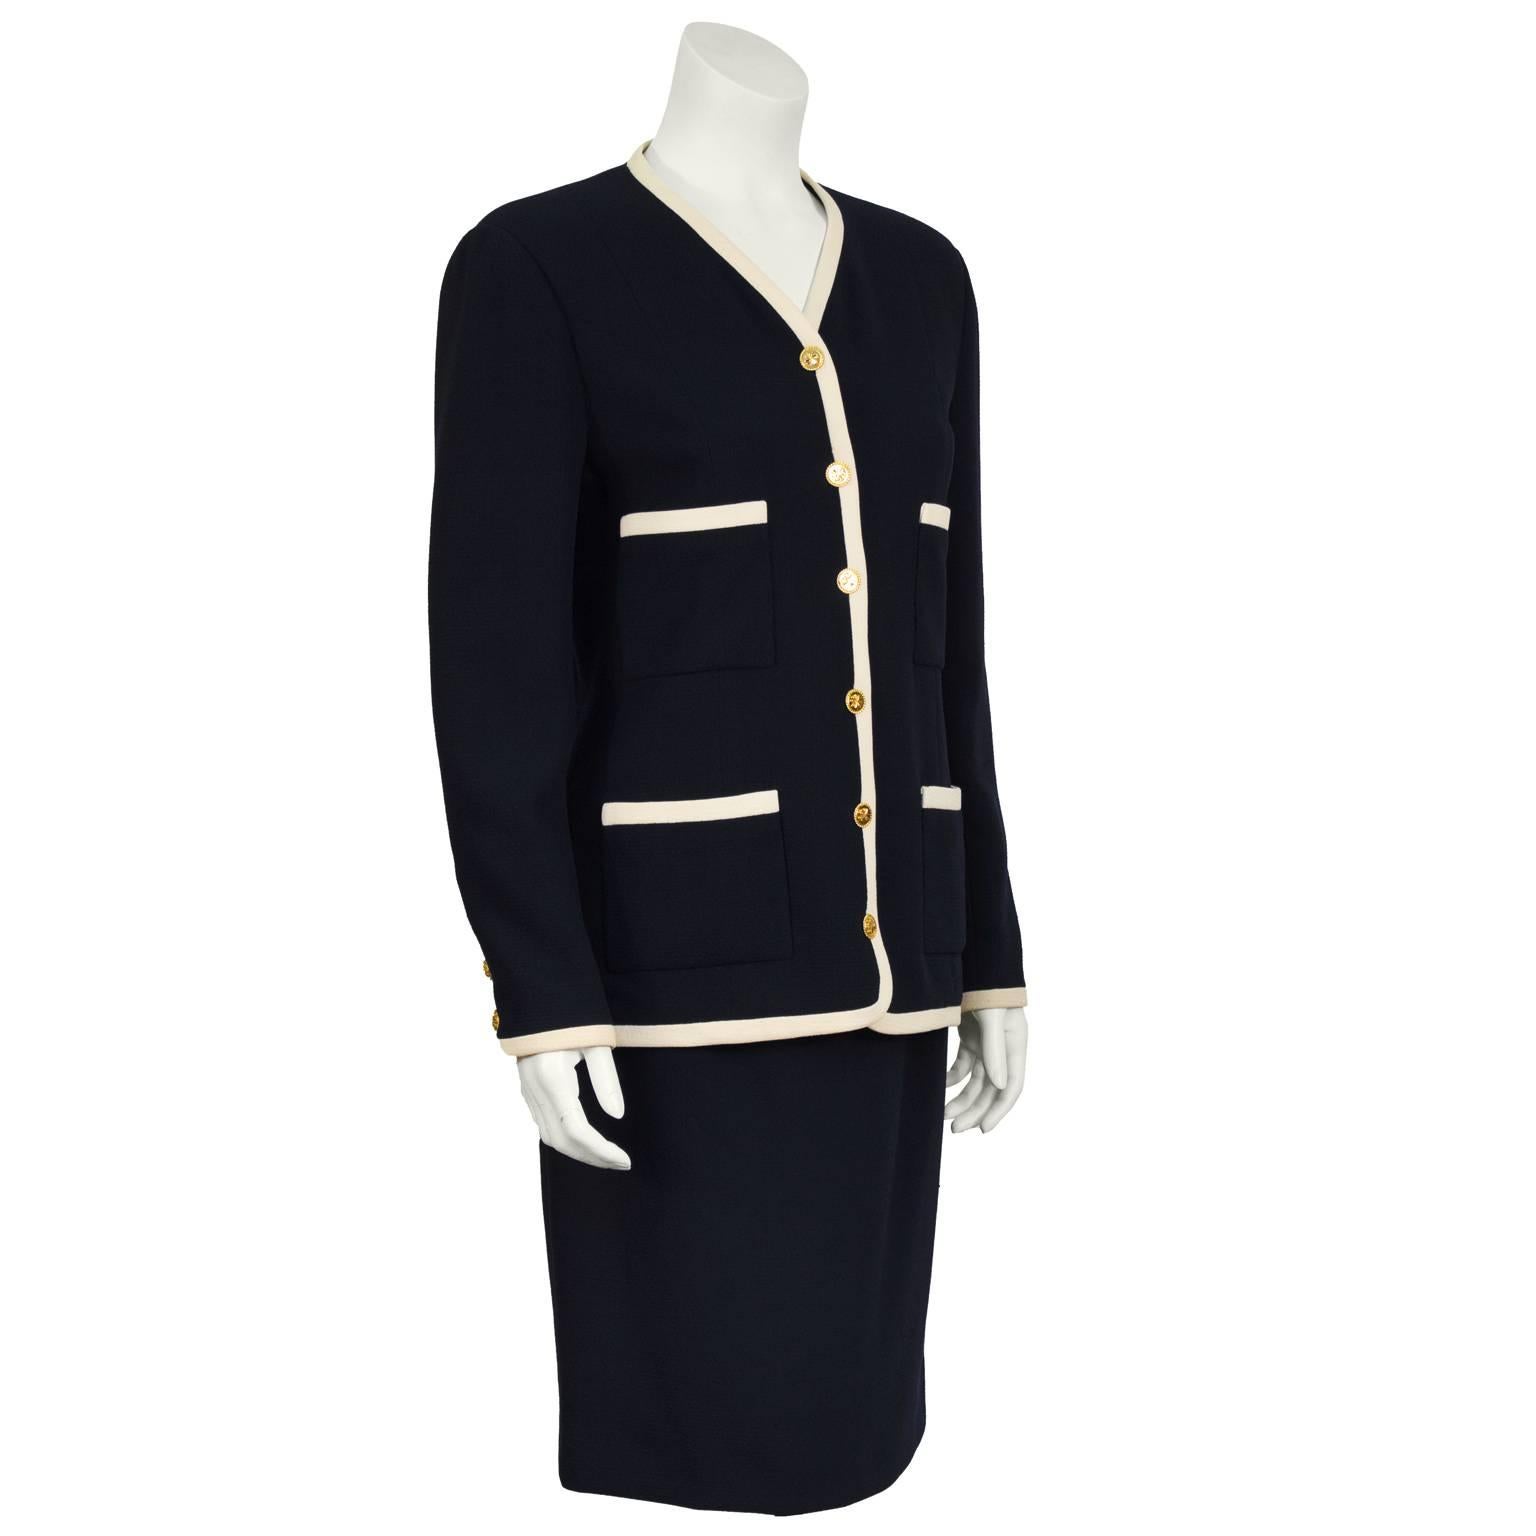 Chanel wool crepe navy suit from the 1980's. The slightly fitted jacket features four front pockets trimmed in white with gold cloverleaf buttons on the front and cuffs, fully lined in silk. Off white trimming throughout. The skirt does up the back